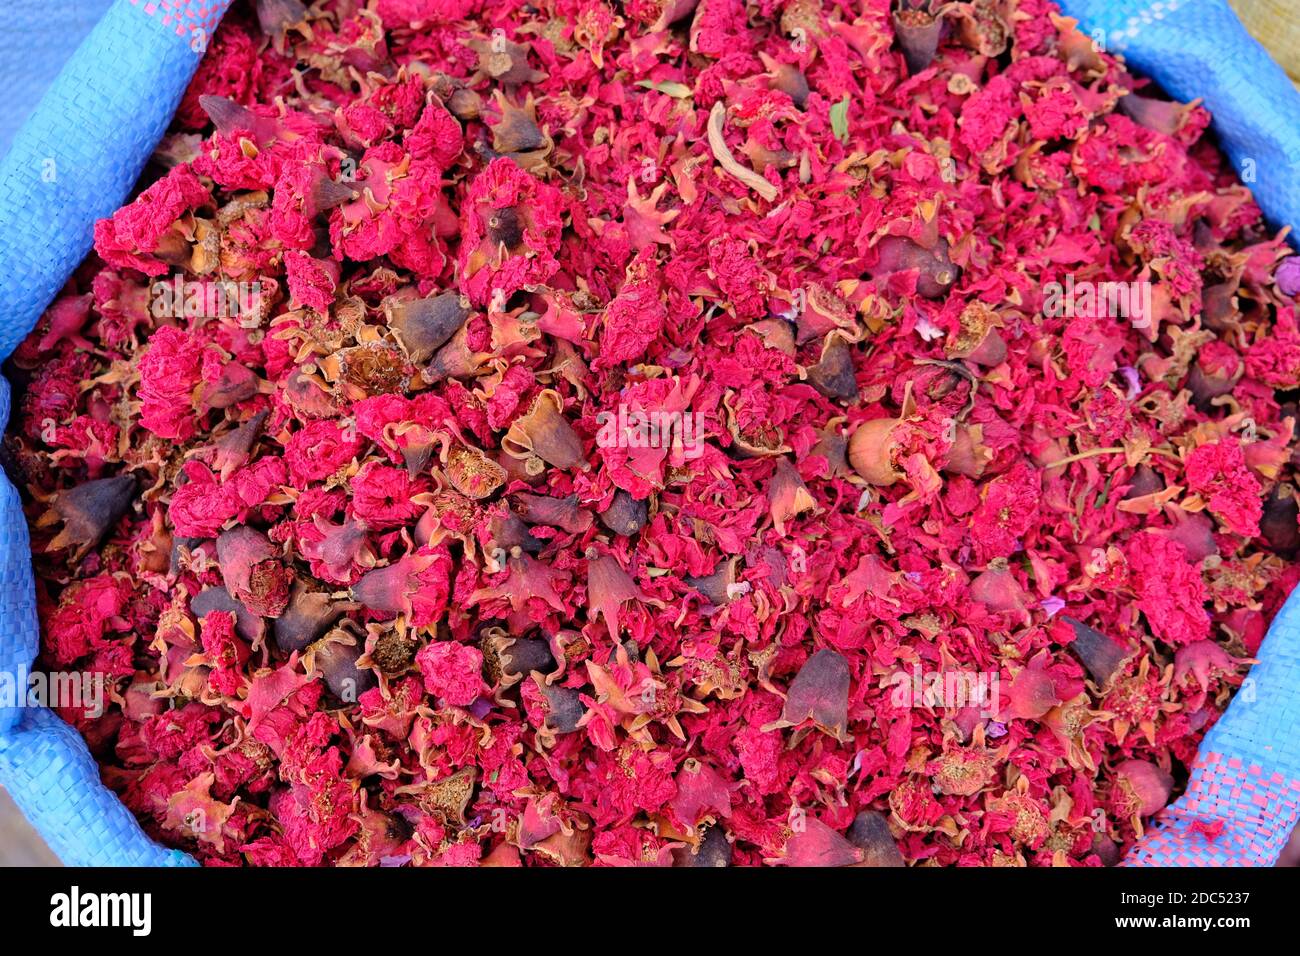 Morocco Marrakesh - Colorful Carnation blossoms of a spice dealer Stock Photo